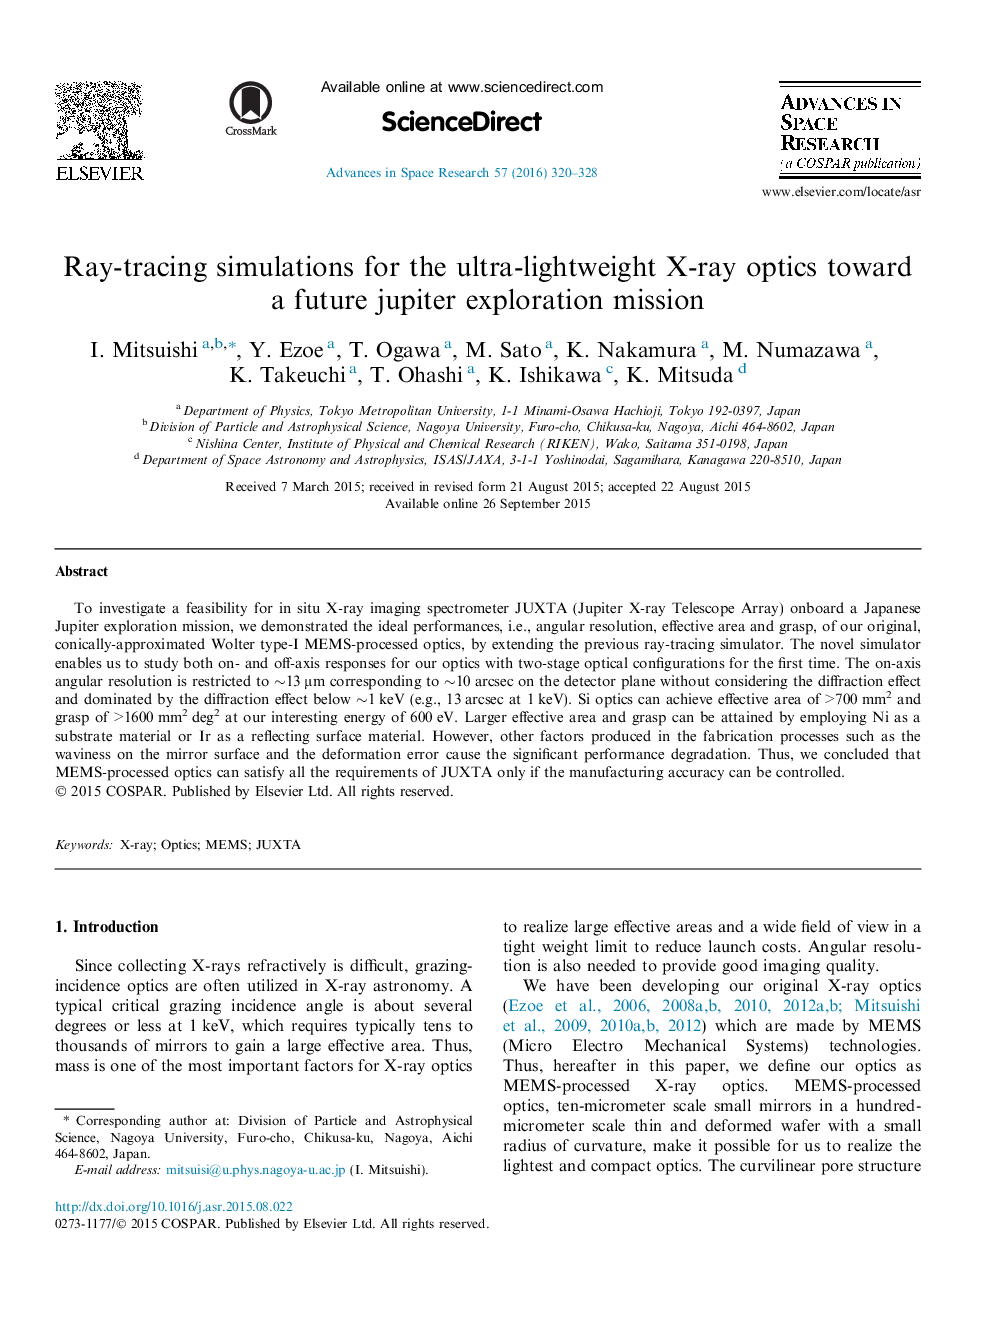 Ray-tracing simulations for the ultra-lightweight X-ray optics toward a future jupiter exploration mission